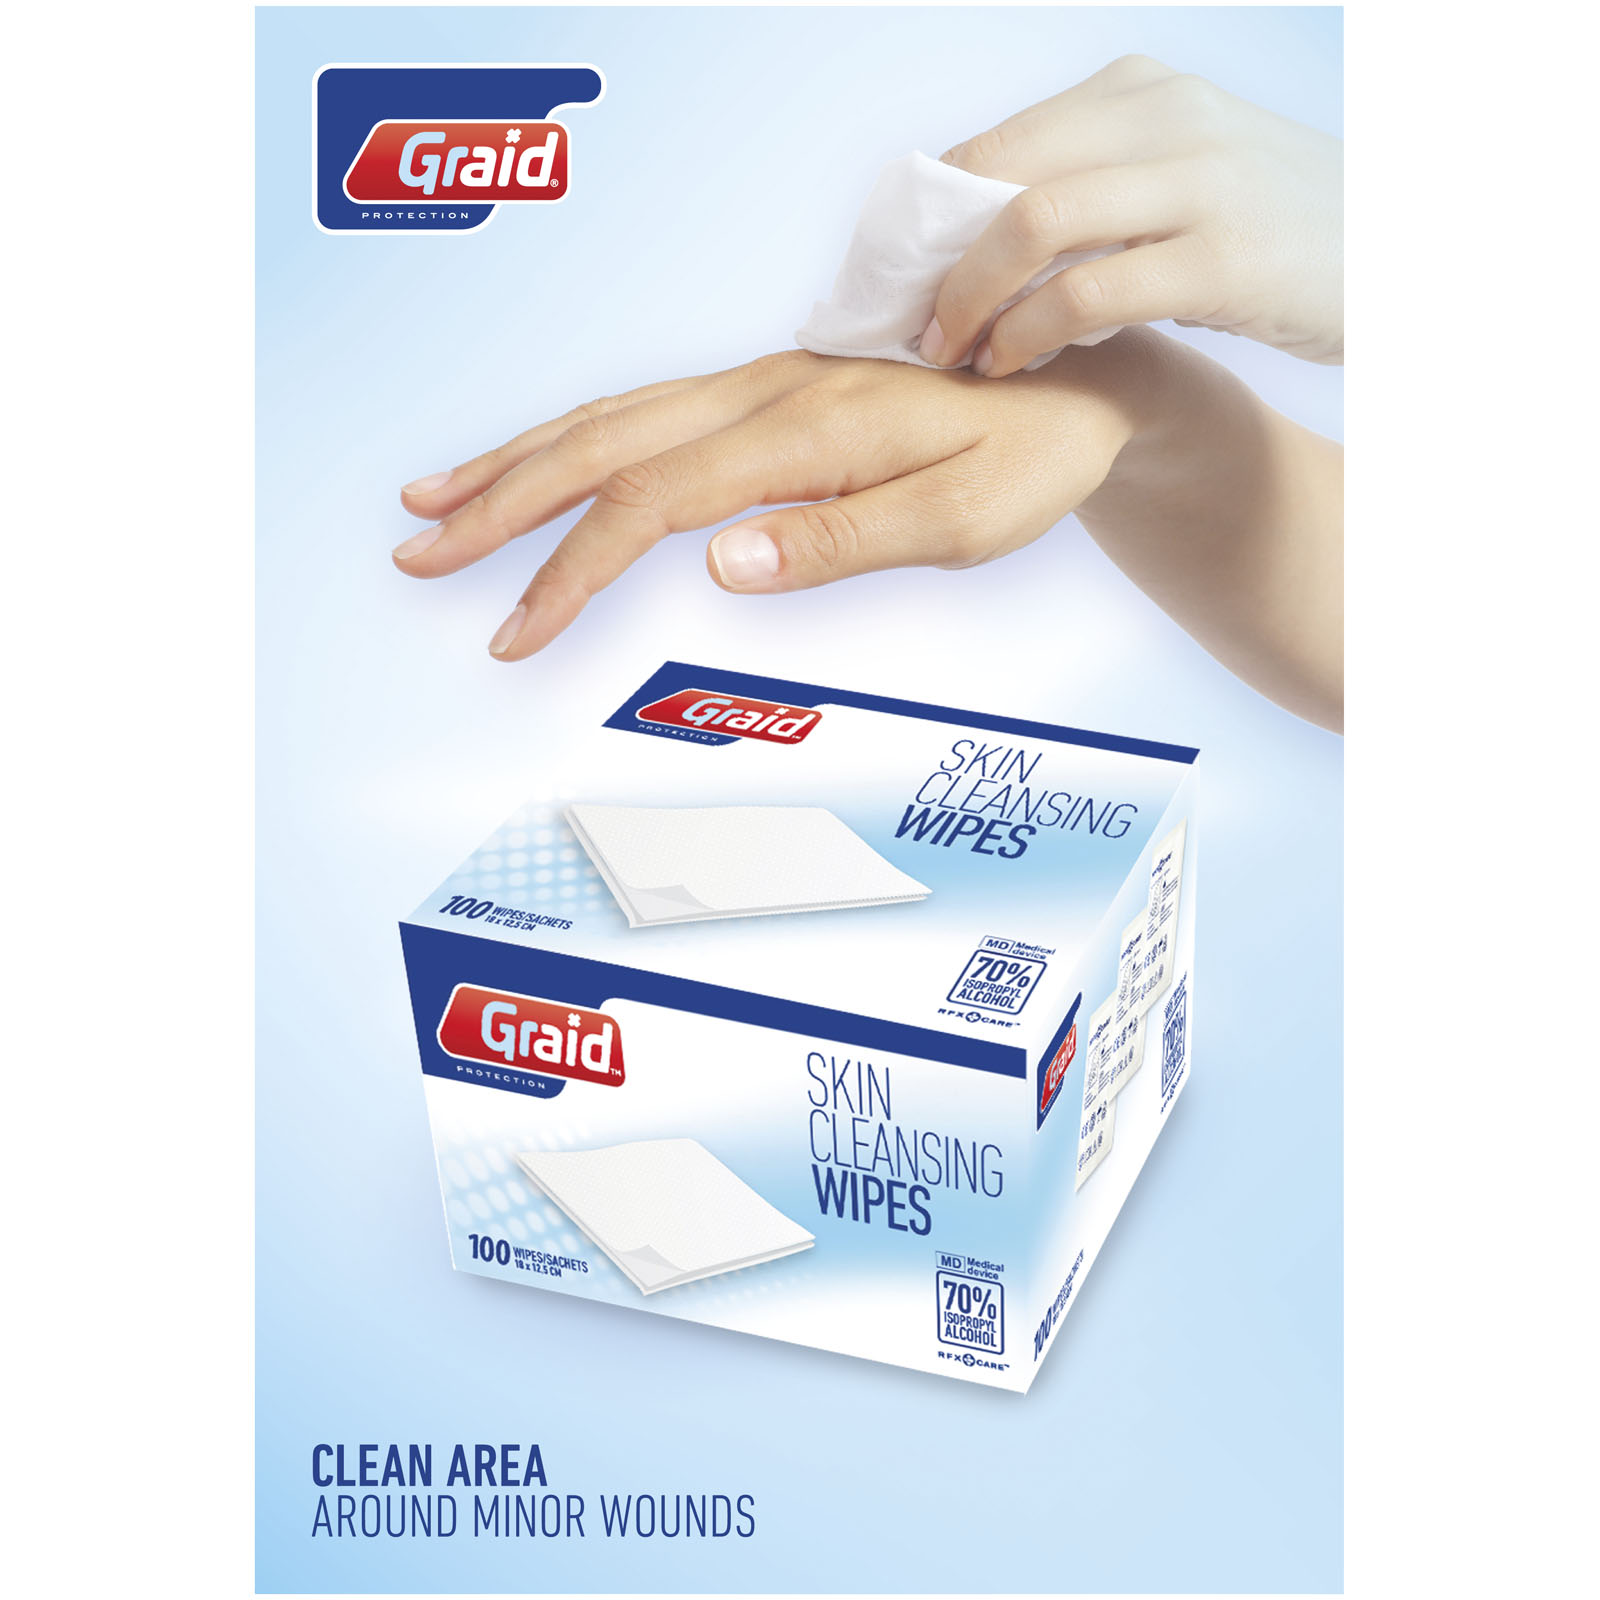 Health & Personal Care - Elisabeth cleansing wipes